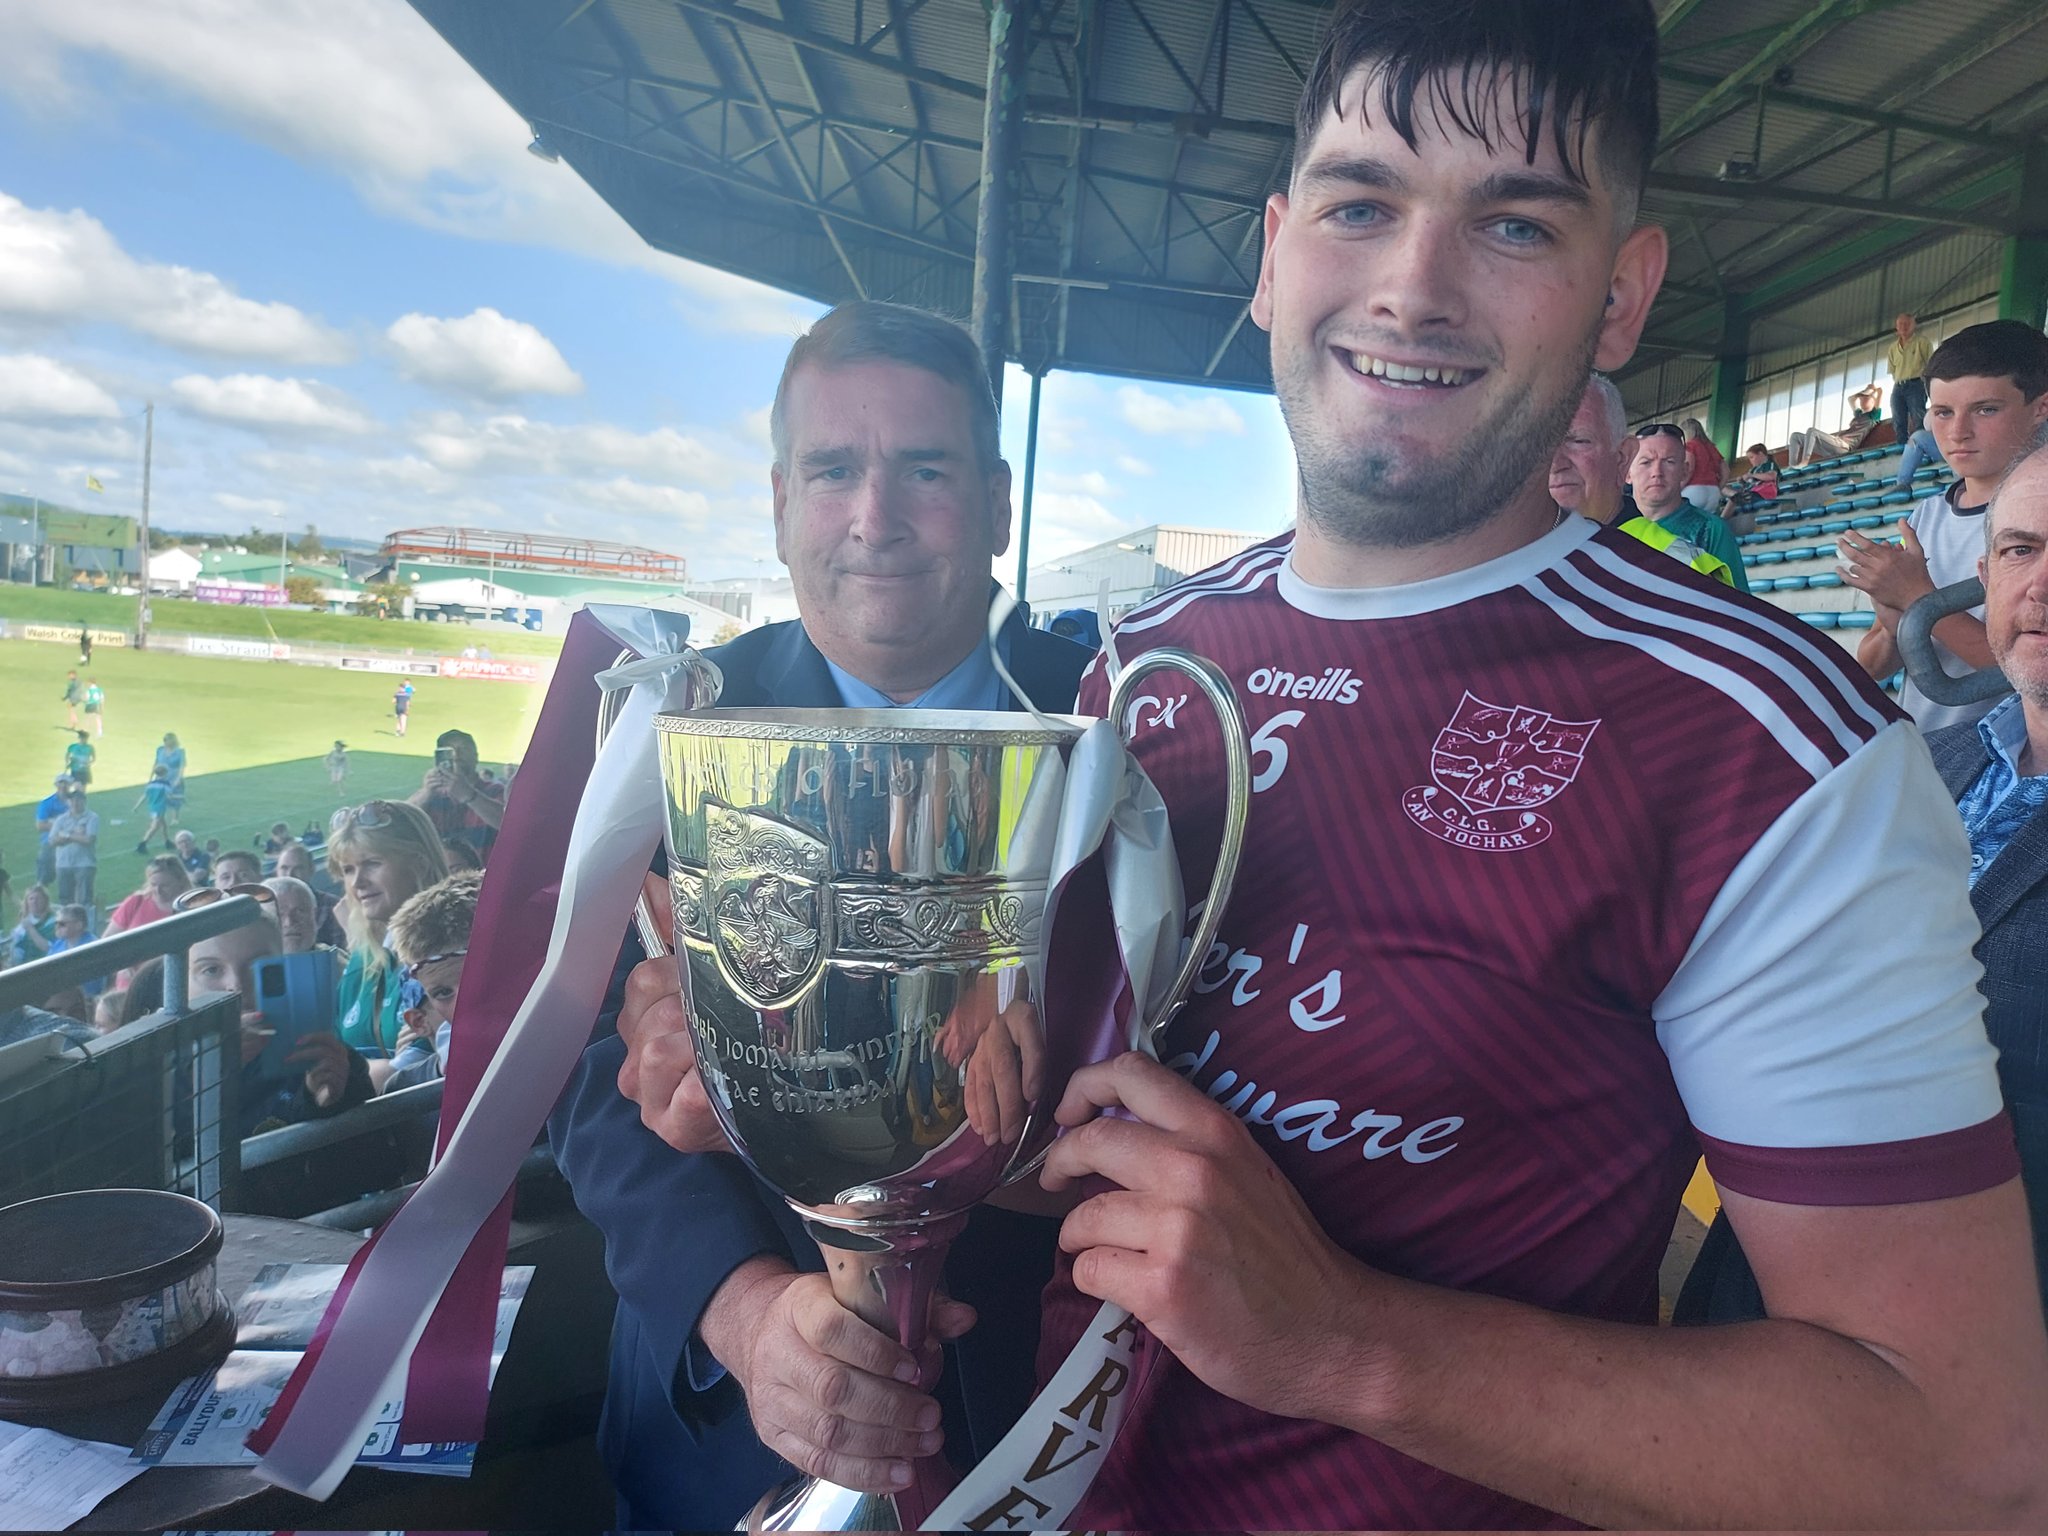 Causeway secure victory over Ballyduff in SHC Final